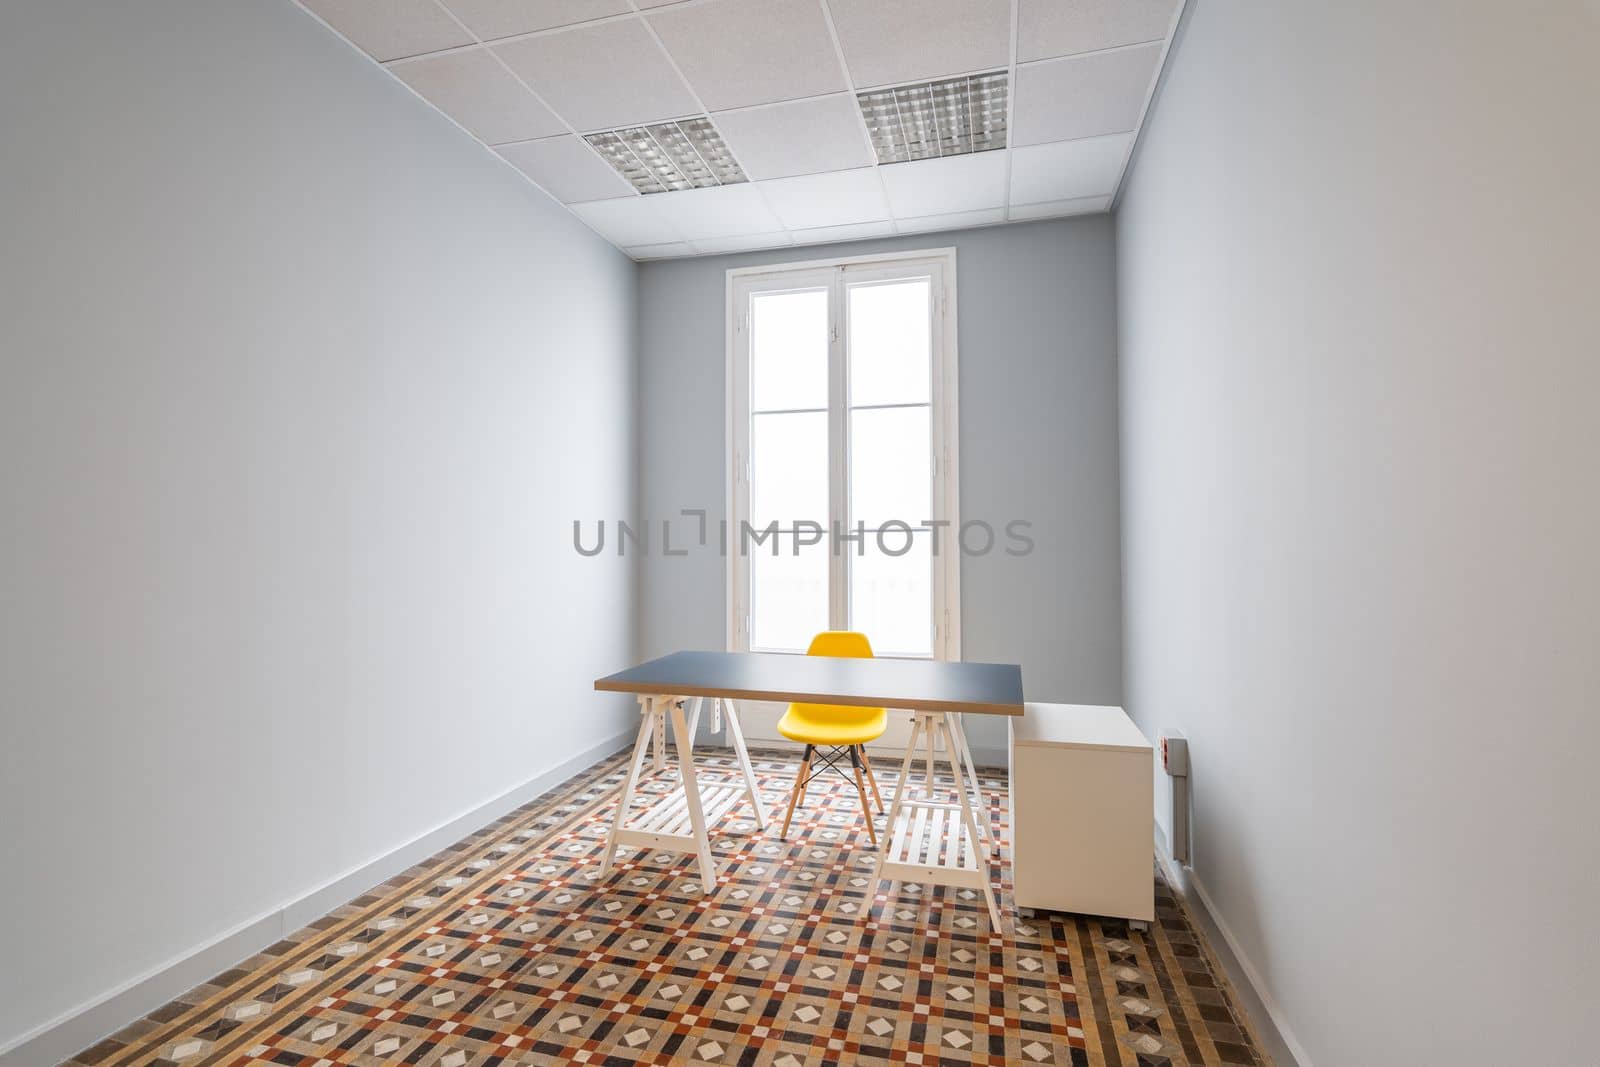 An empty room with gray smooth walls, doors leading to terrace. Floor is made of patterned marble tiles. There is table with gray top a yellow plastic chair with wooden legs in room. by apavlin